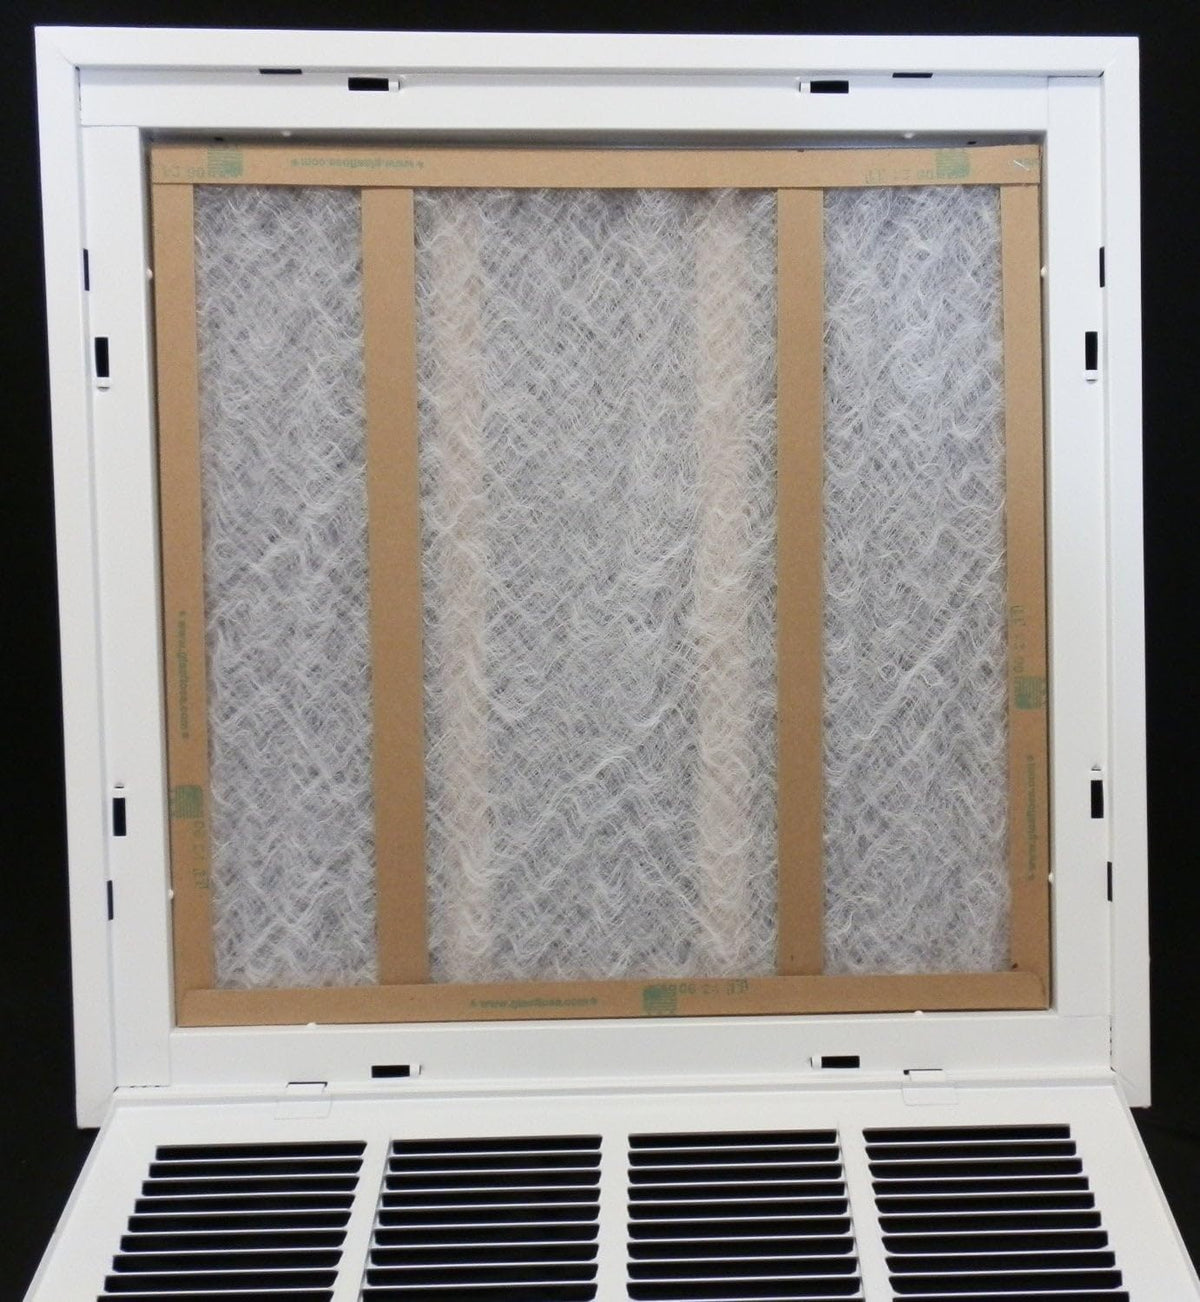 12&quot; X 24&quot; Steel Return Air Filter Grille for 1&quot; Filter - Fixed Hinged - [Outer Dimensions: 14 5/8&quot; X 26 5/8&quot;]